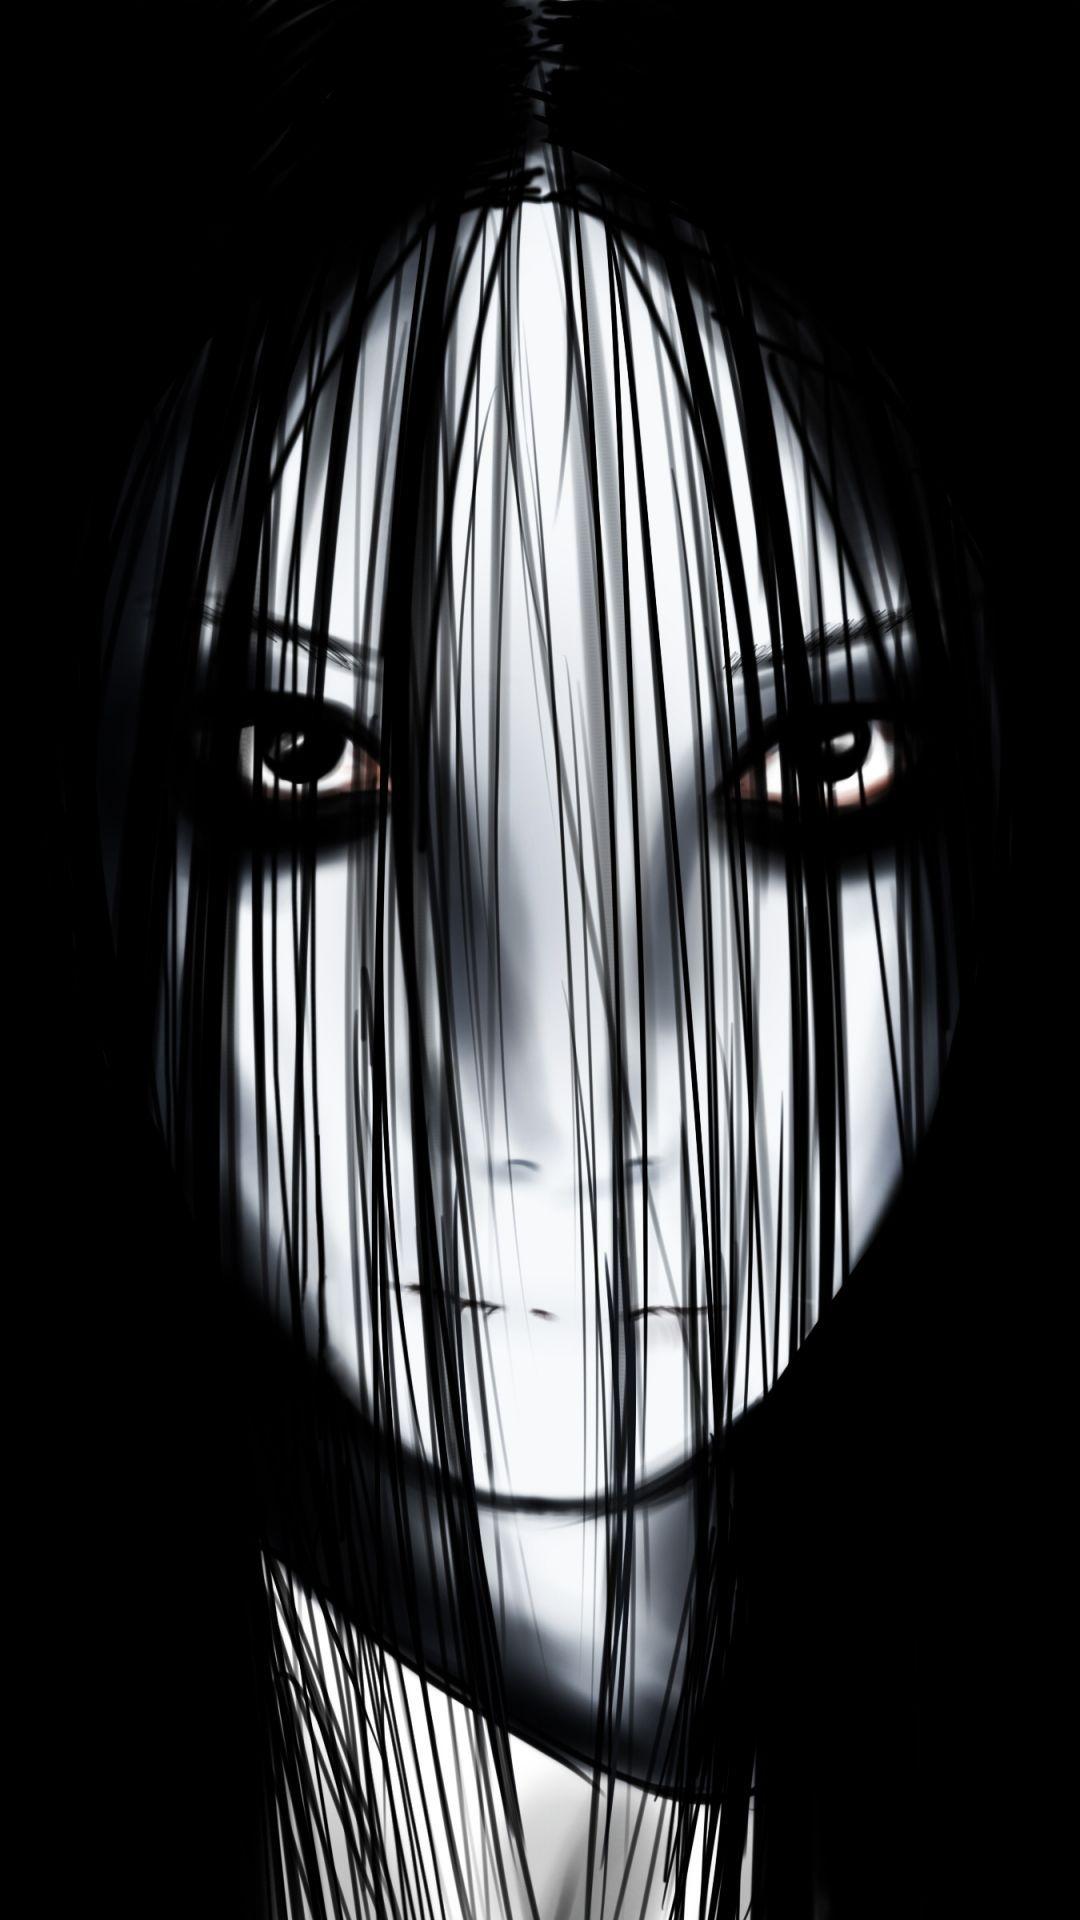 The Grudge Wallpaper Image